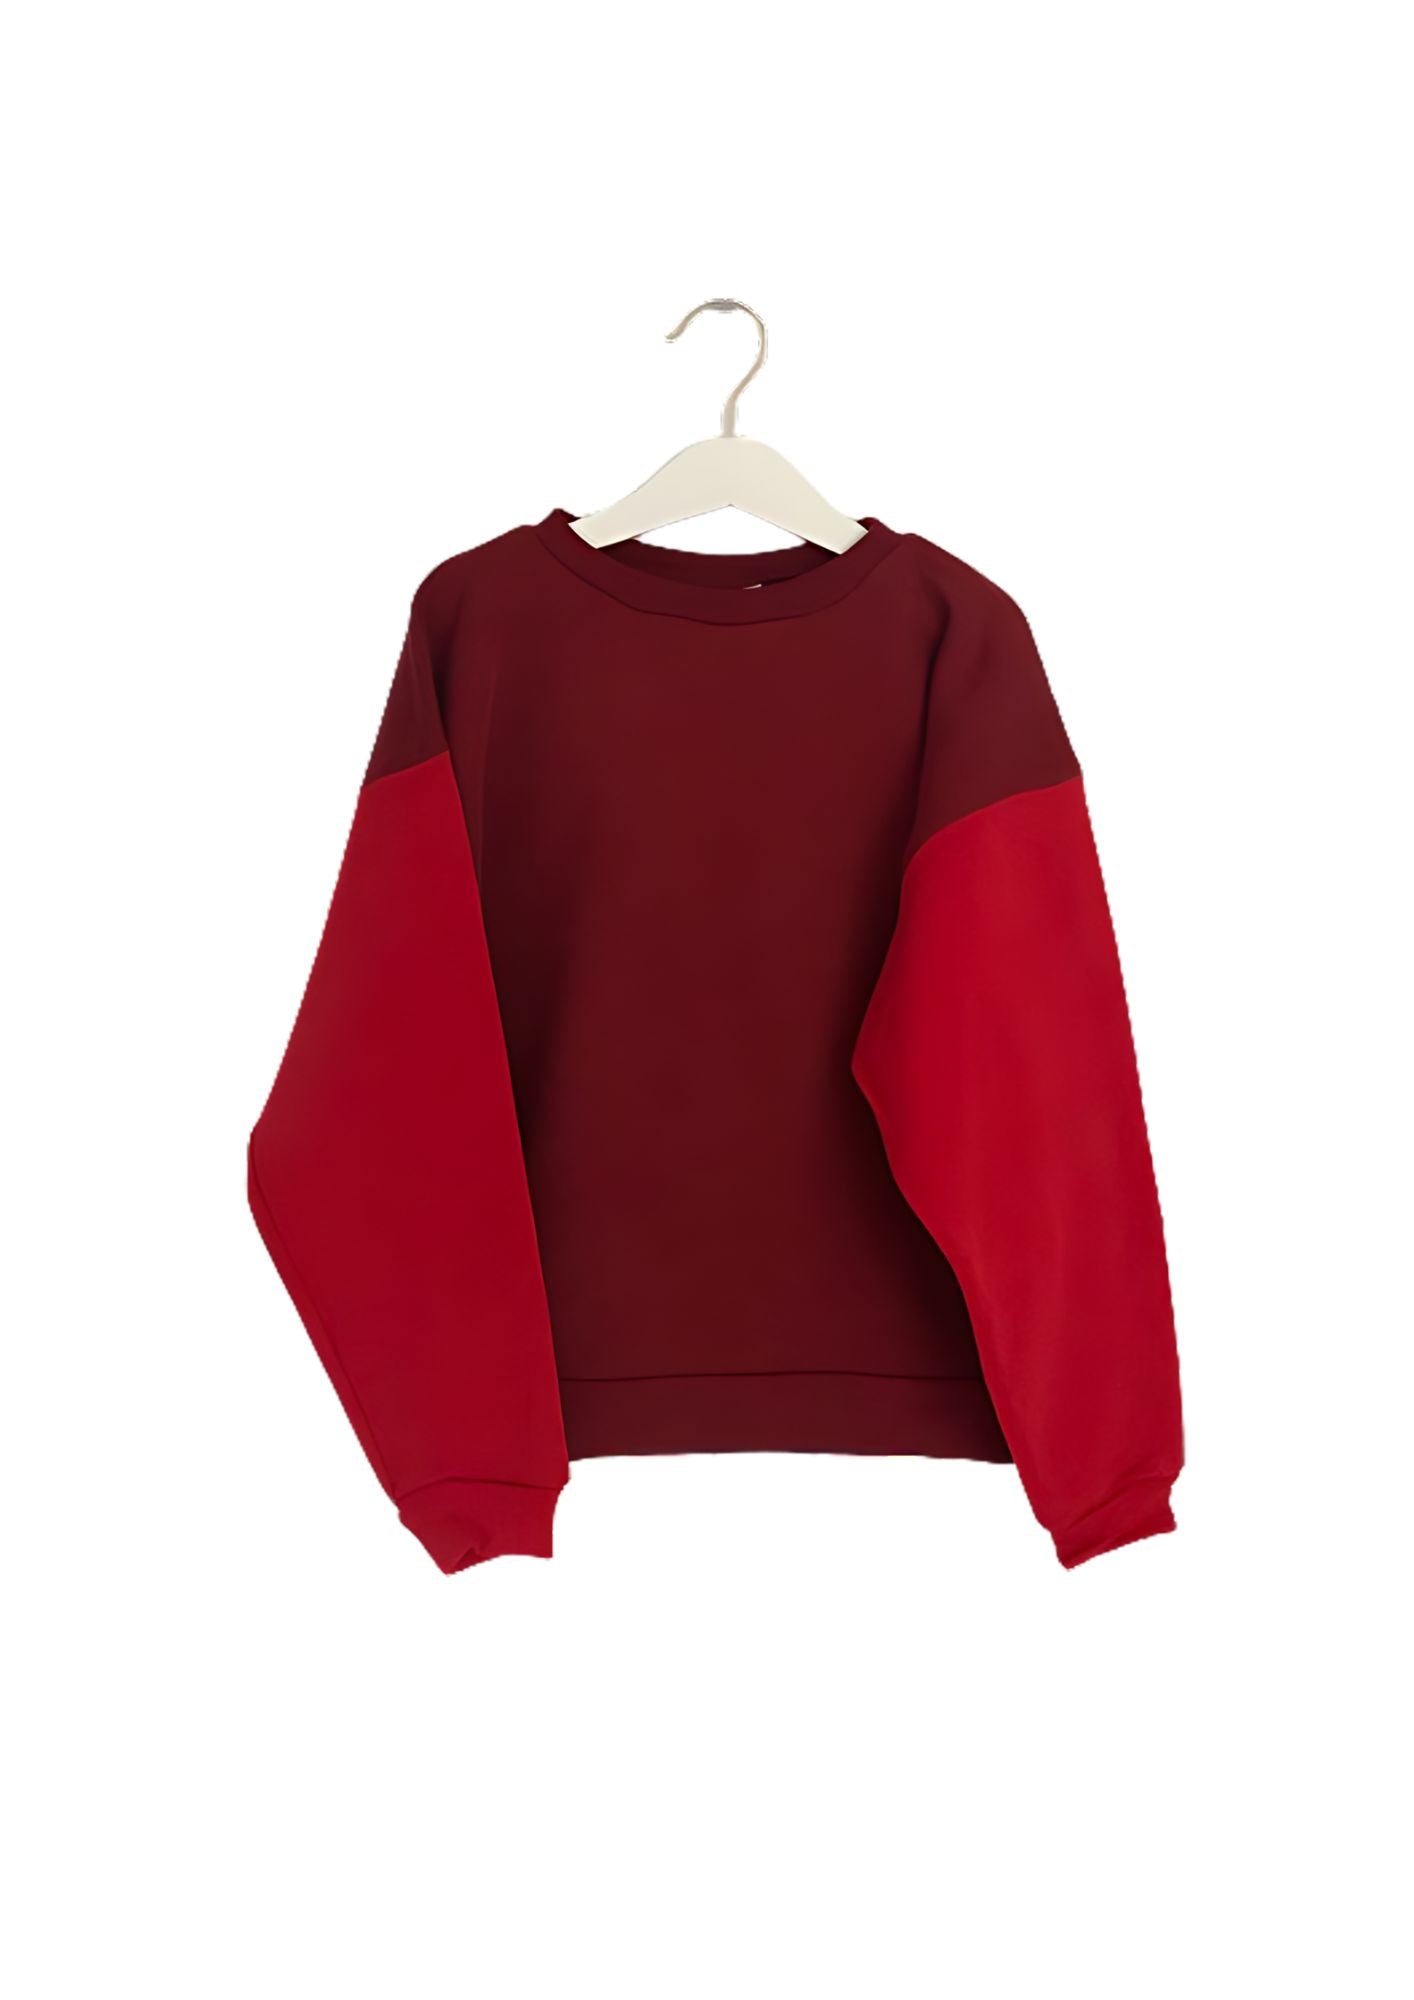 SWEAT JERRY 6 ANS ROUGE